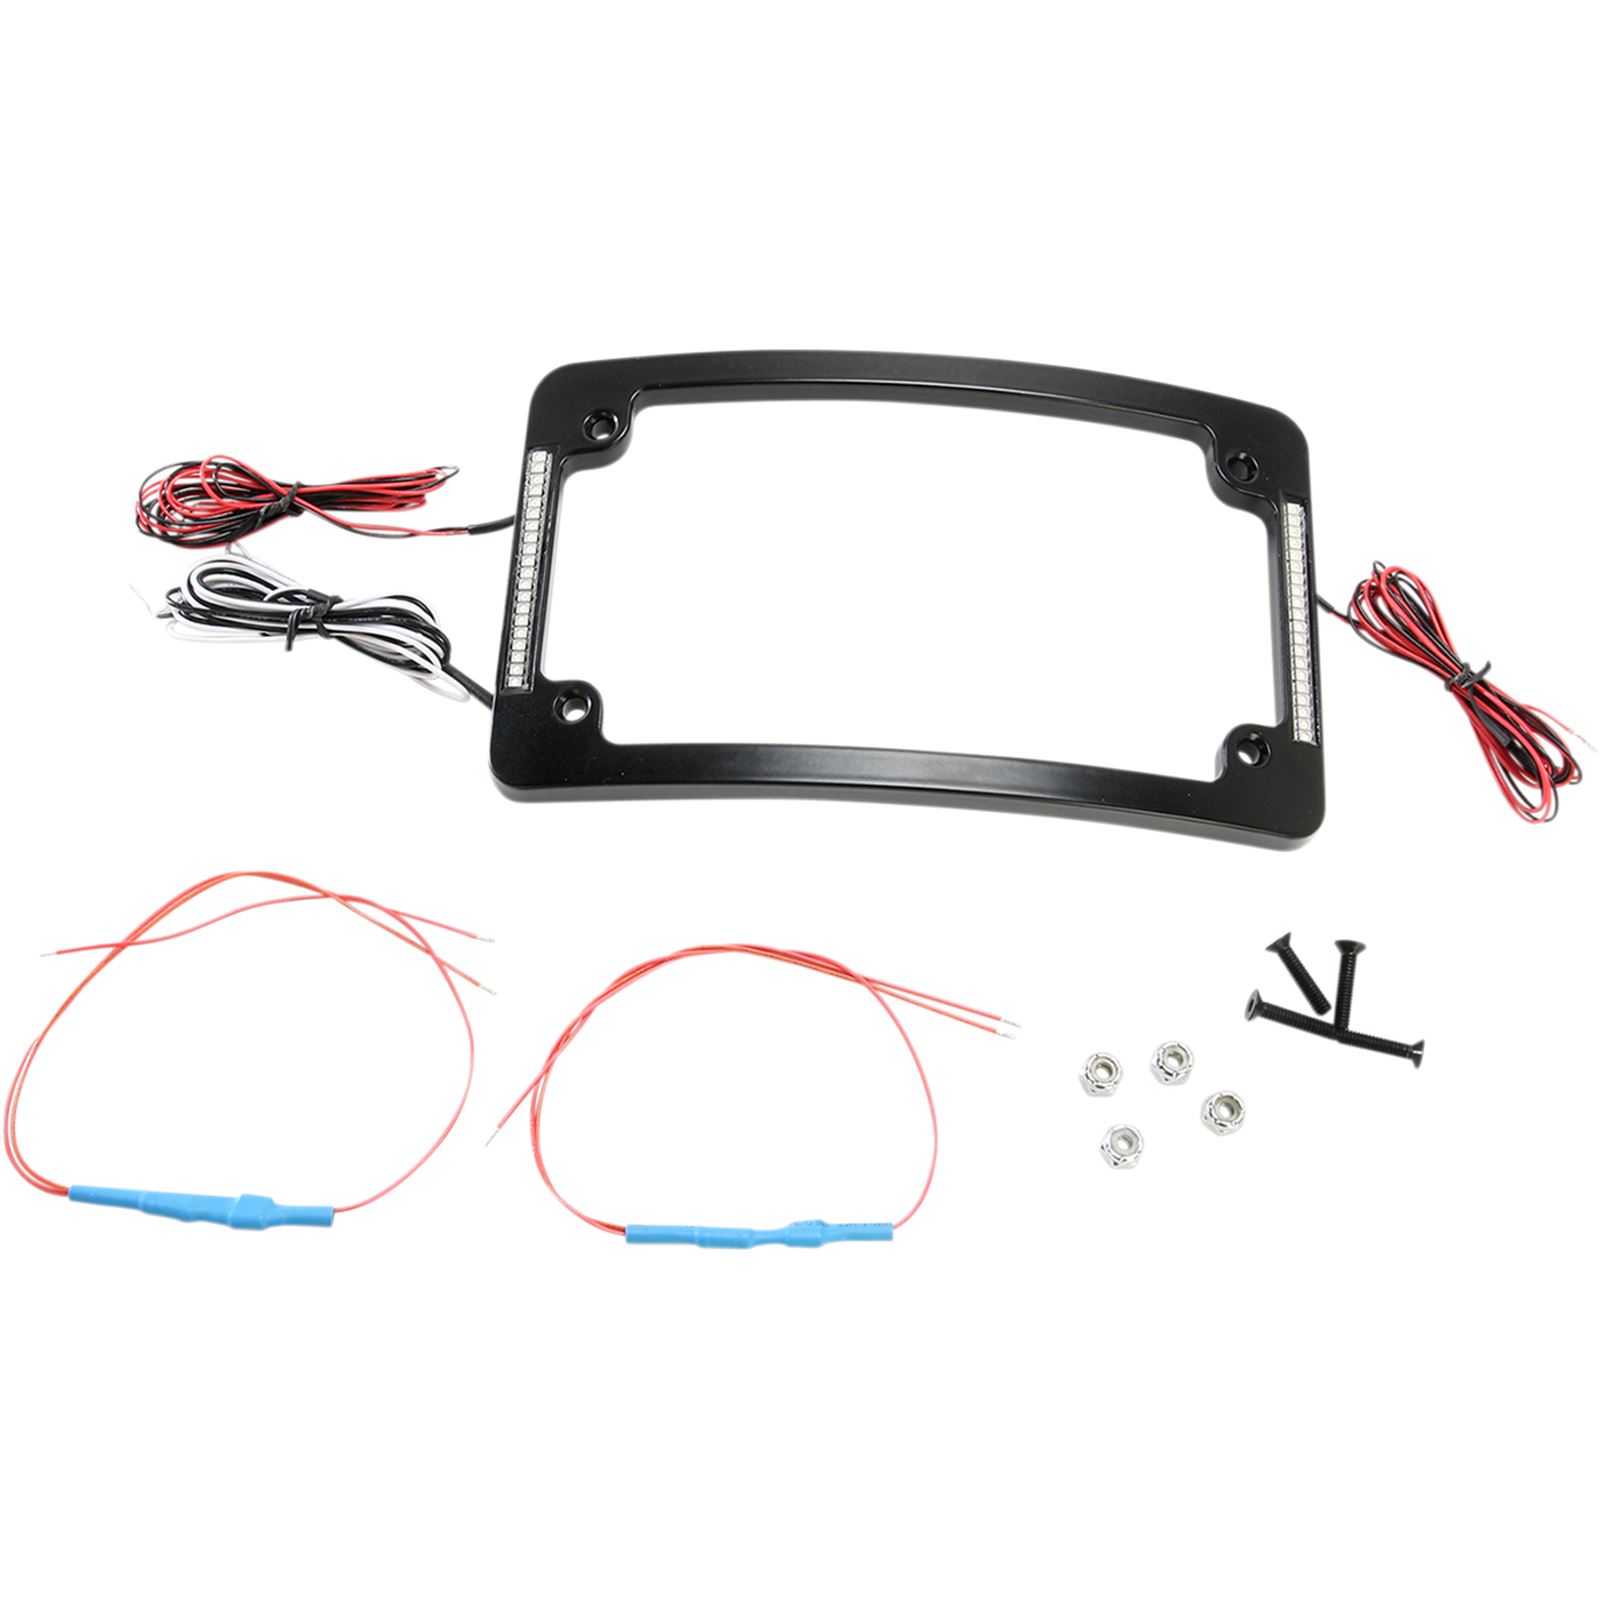 Quad Motorcycle Plate Frames with LEDs